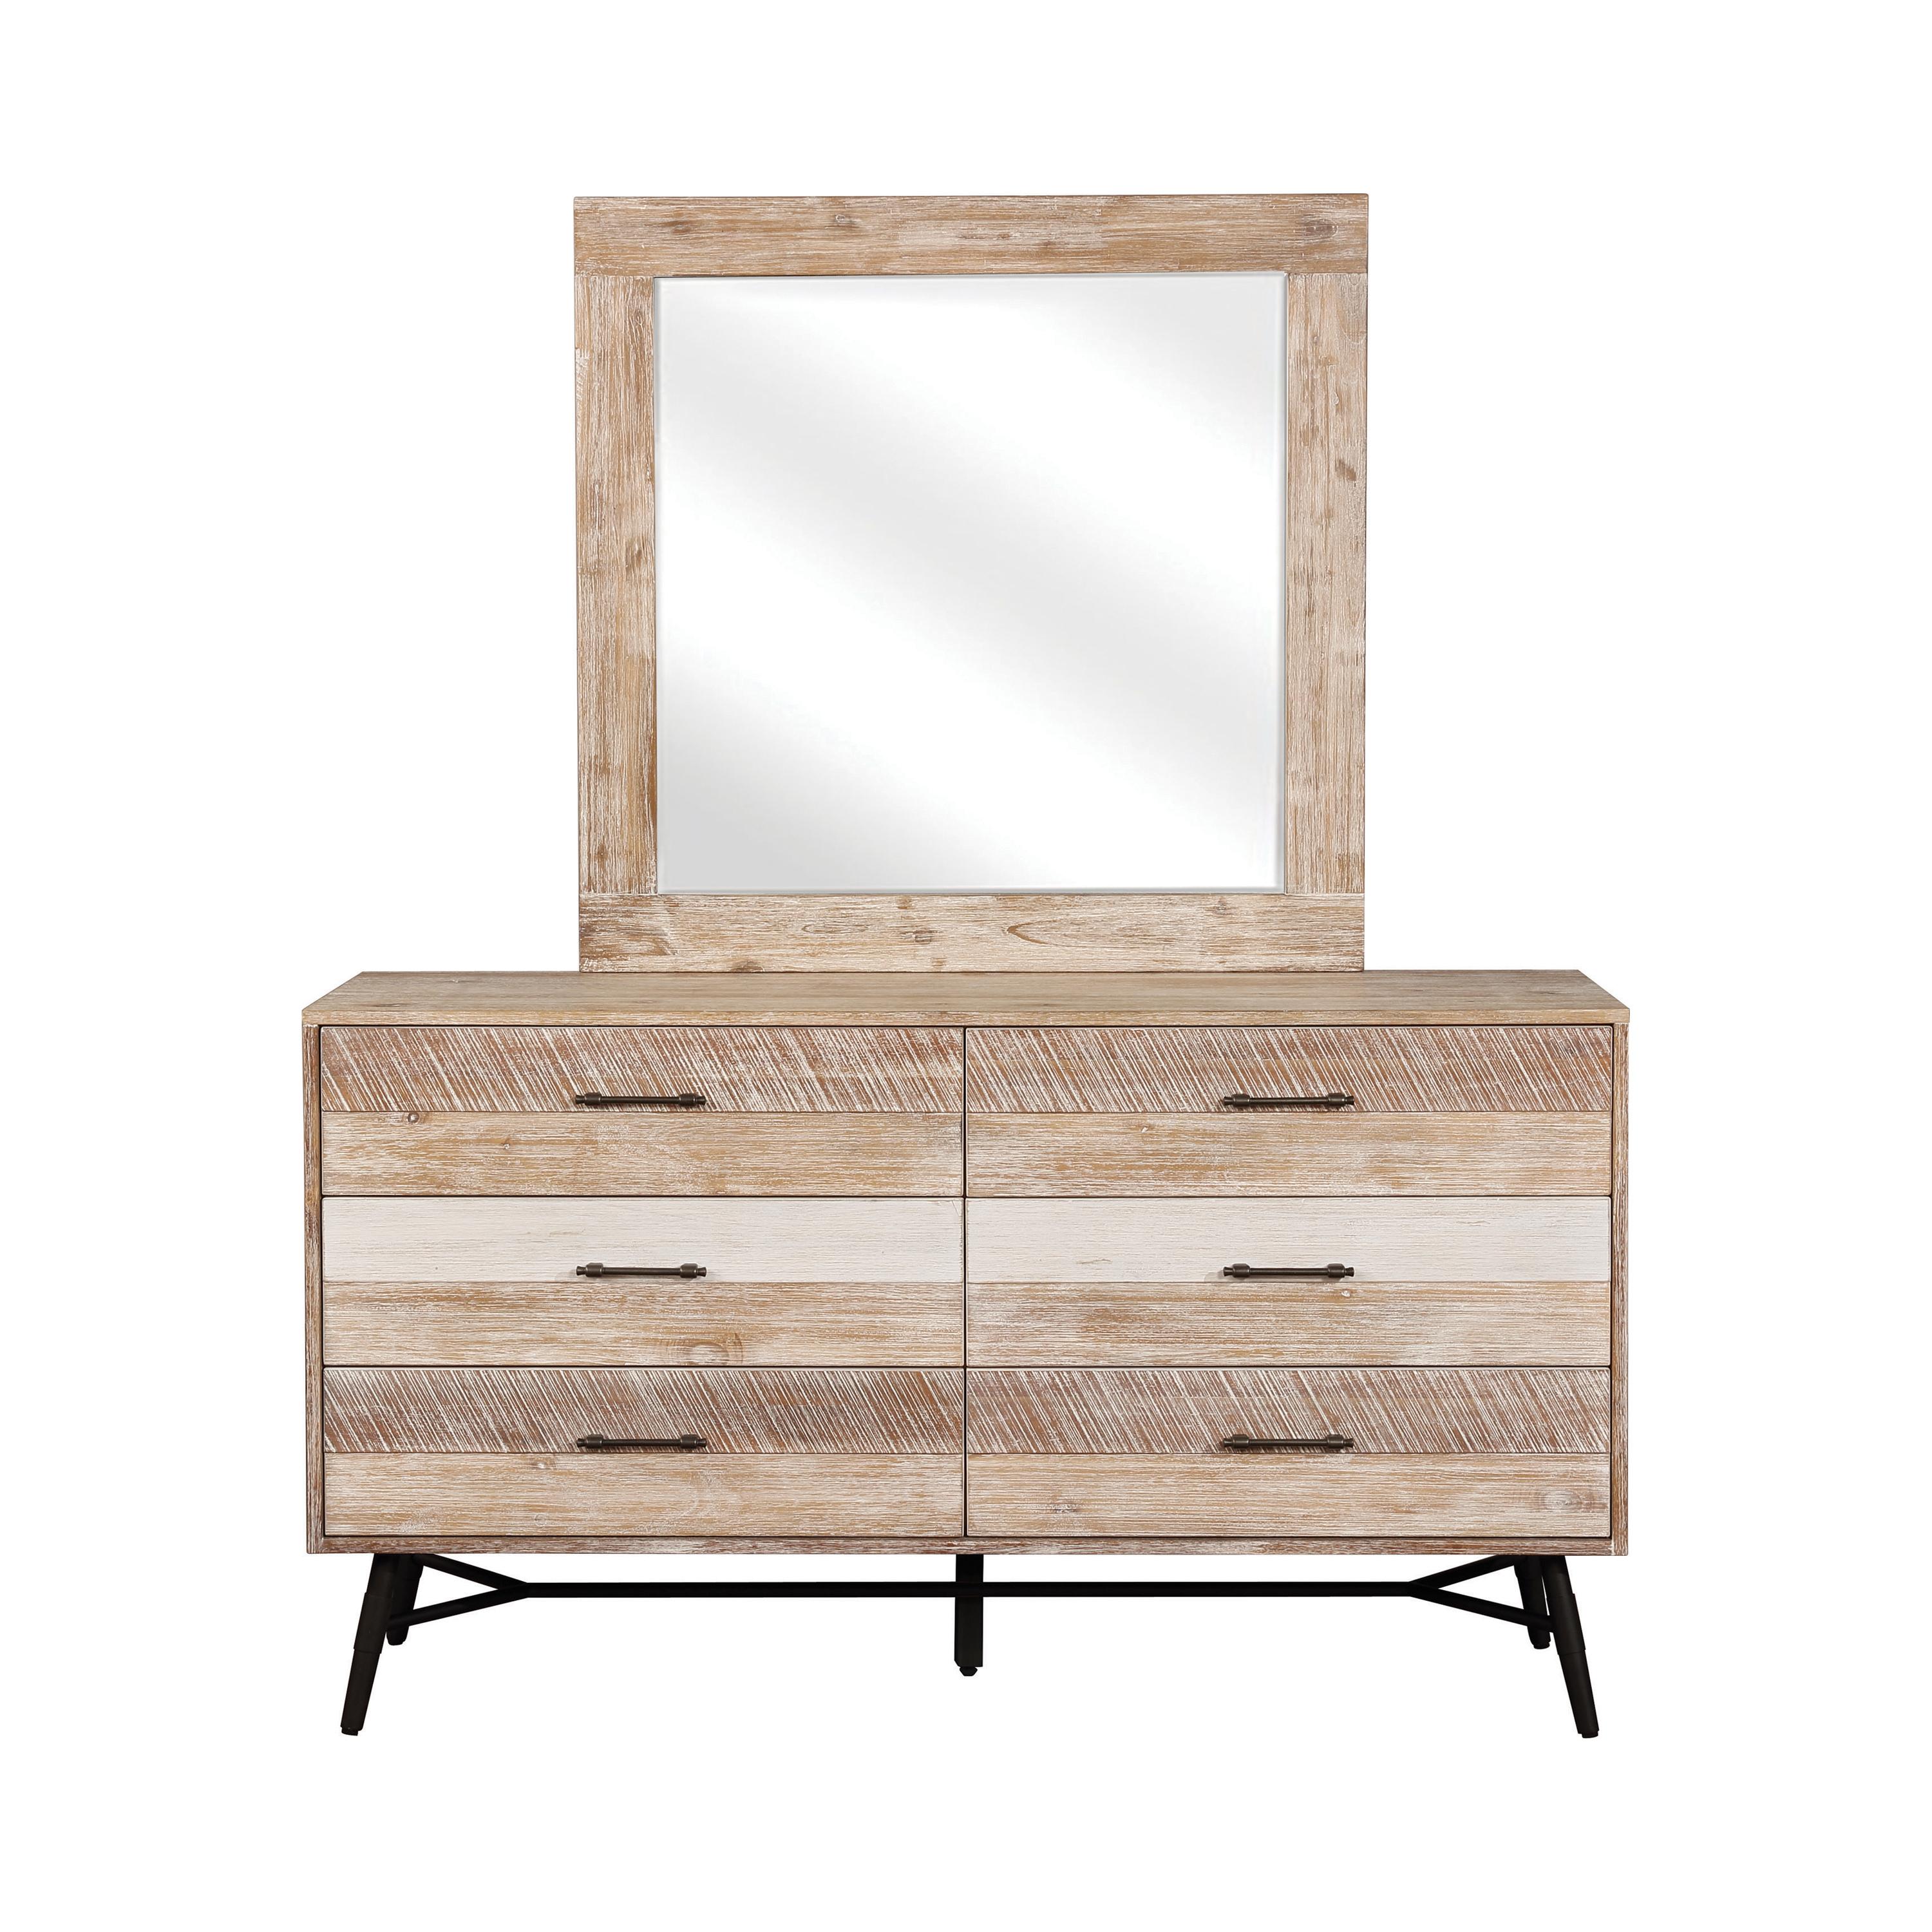 Rustic Dresser w/Mirror 215763-2PC Marlow 215763-2PC in Natural 